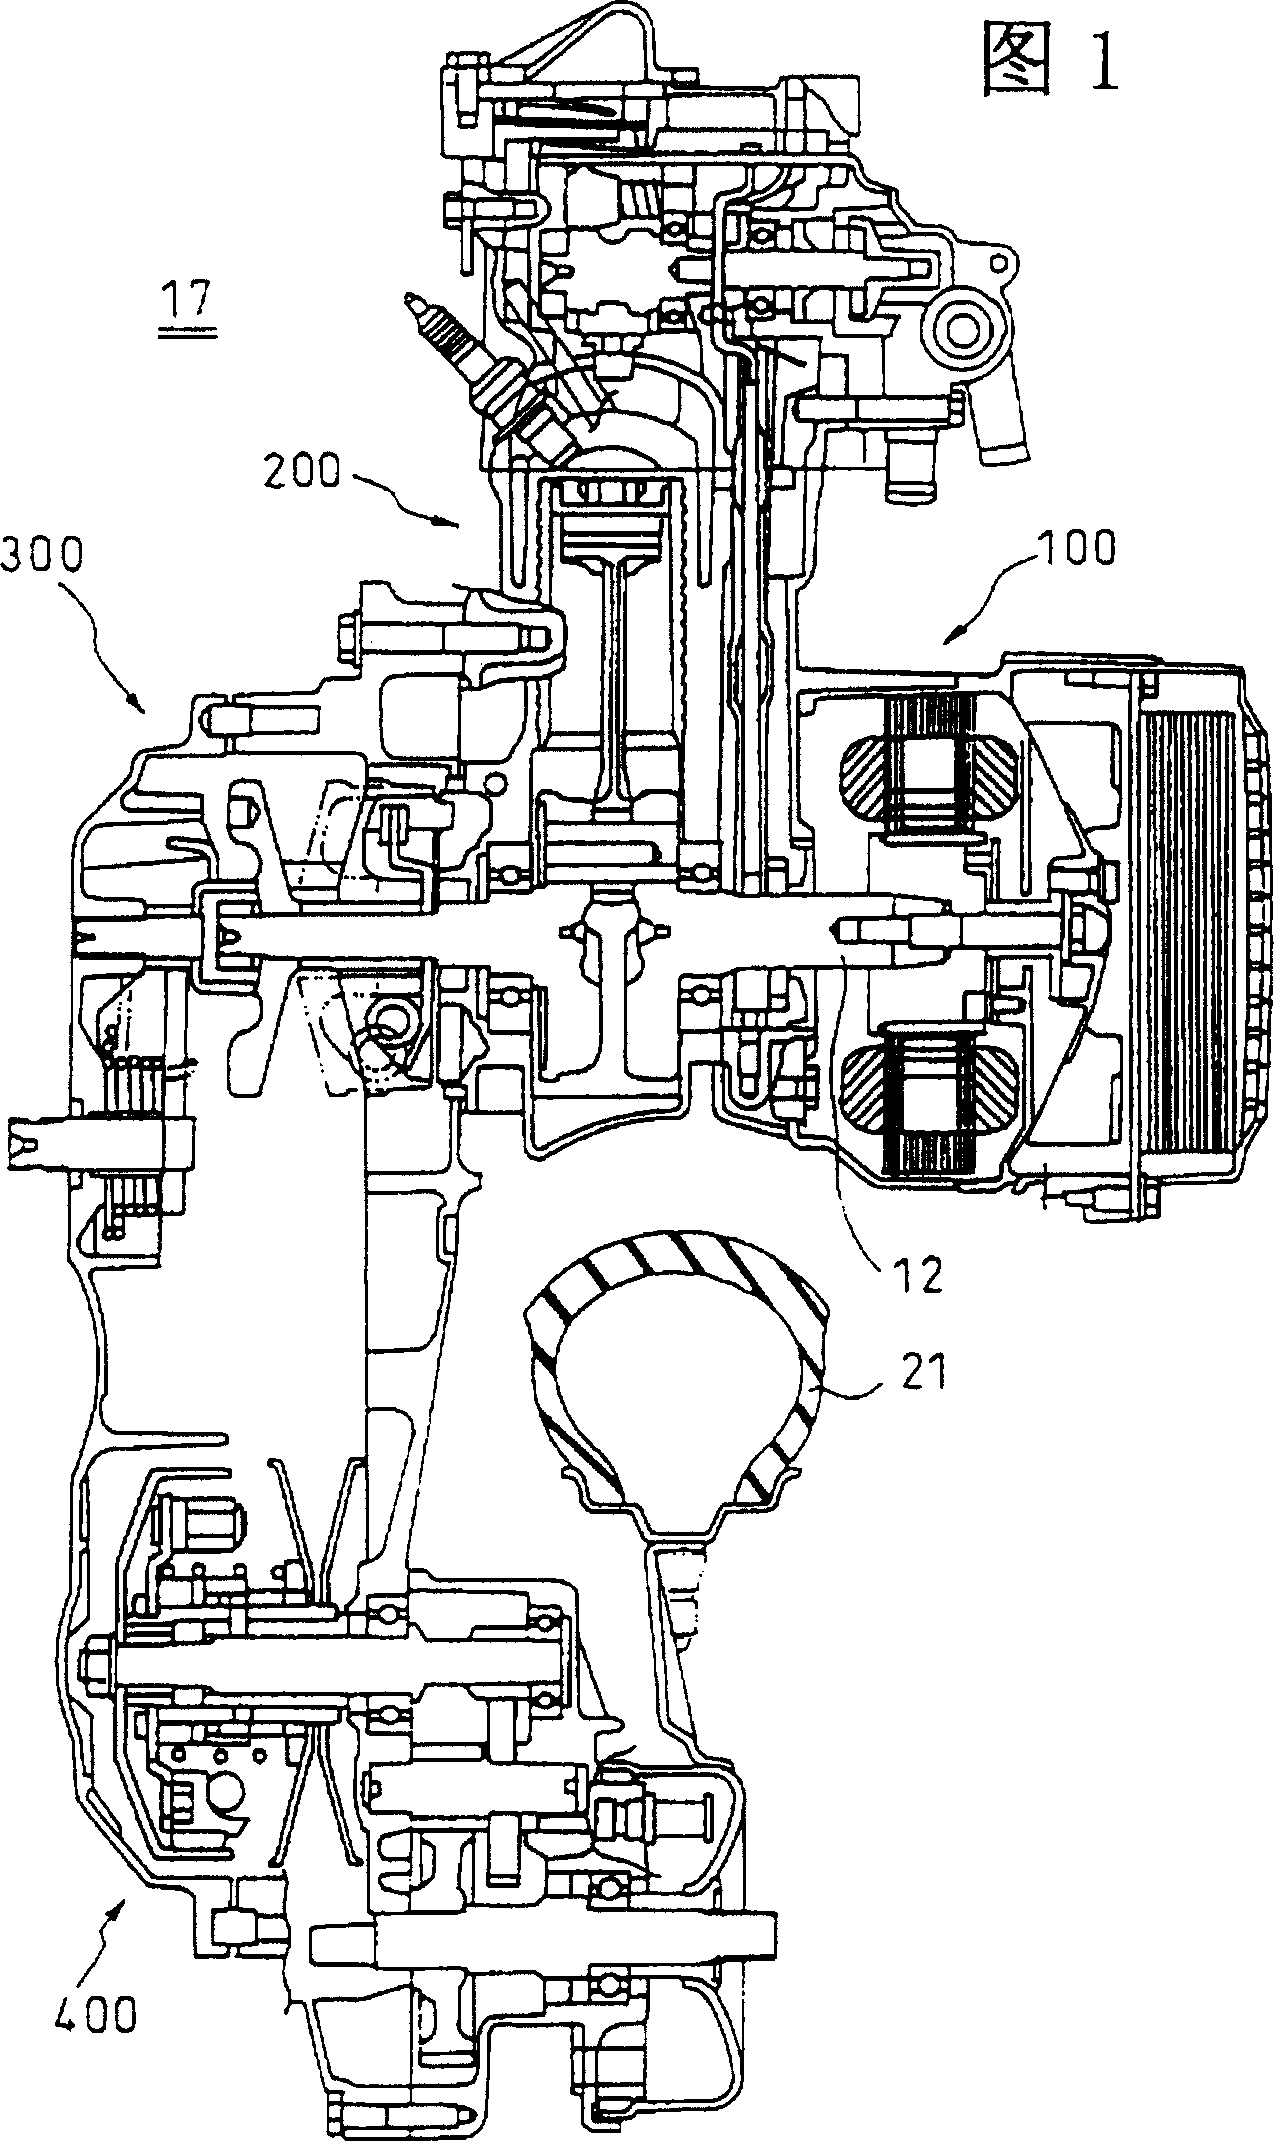 Actuating and generating device for vehicles